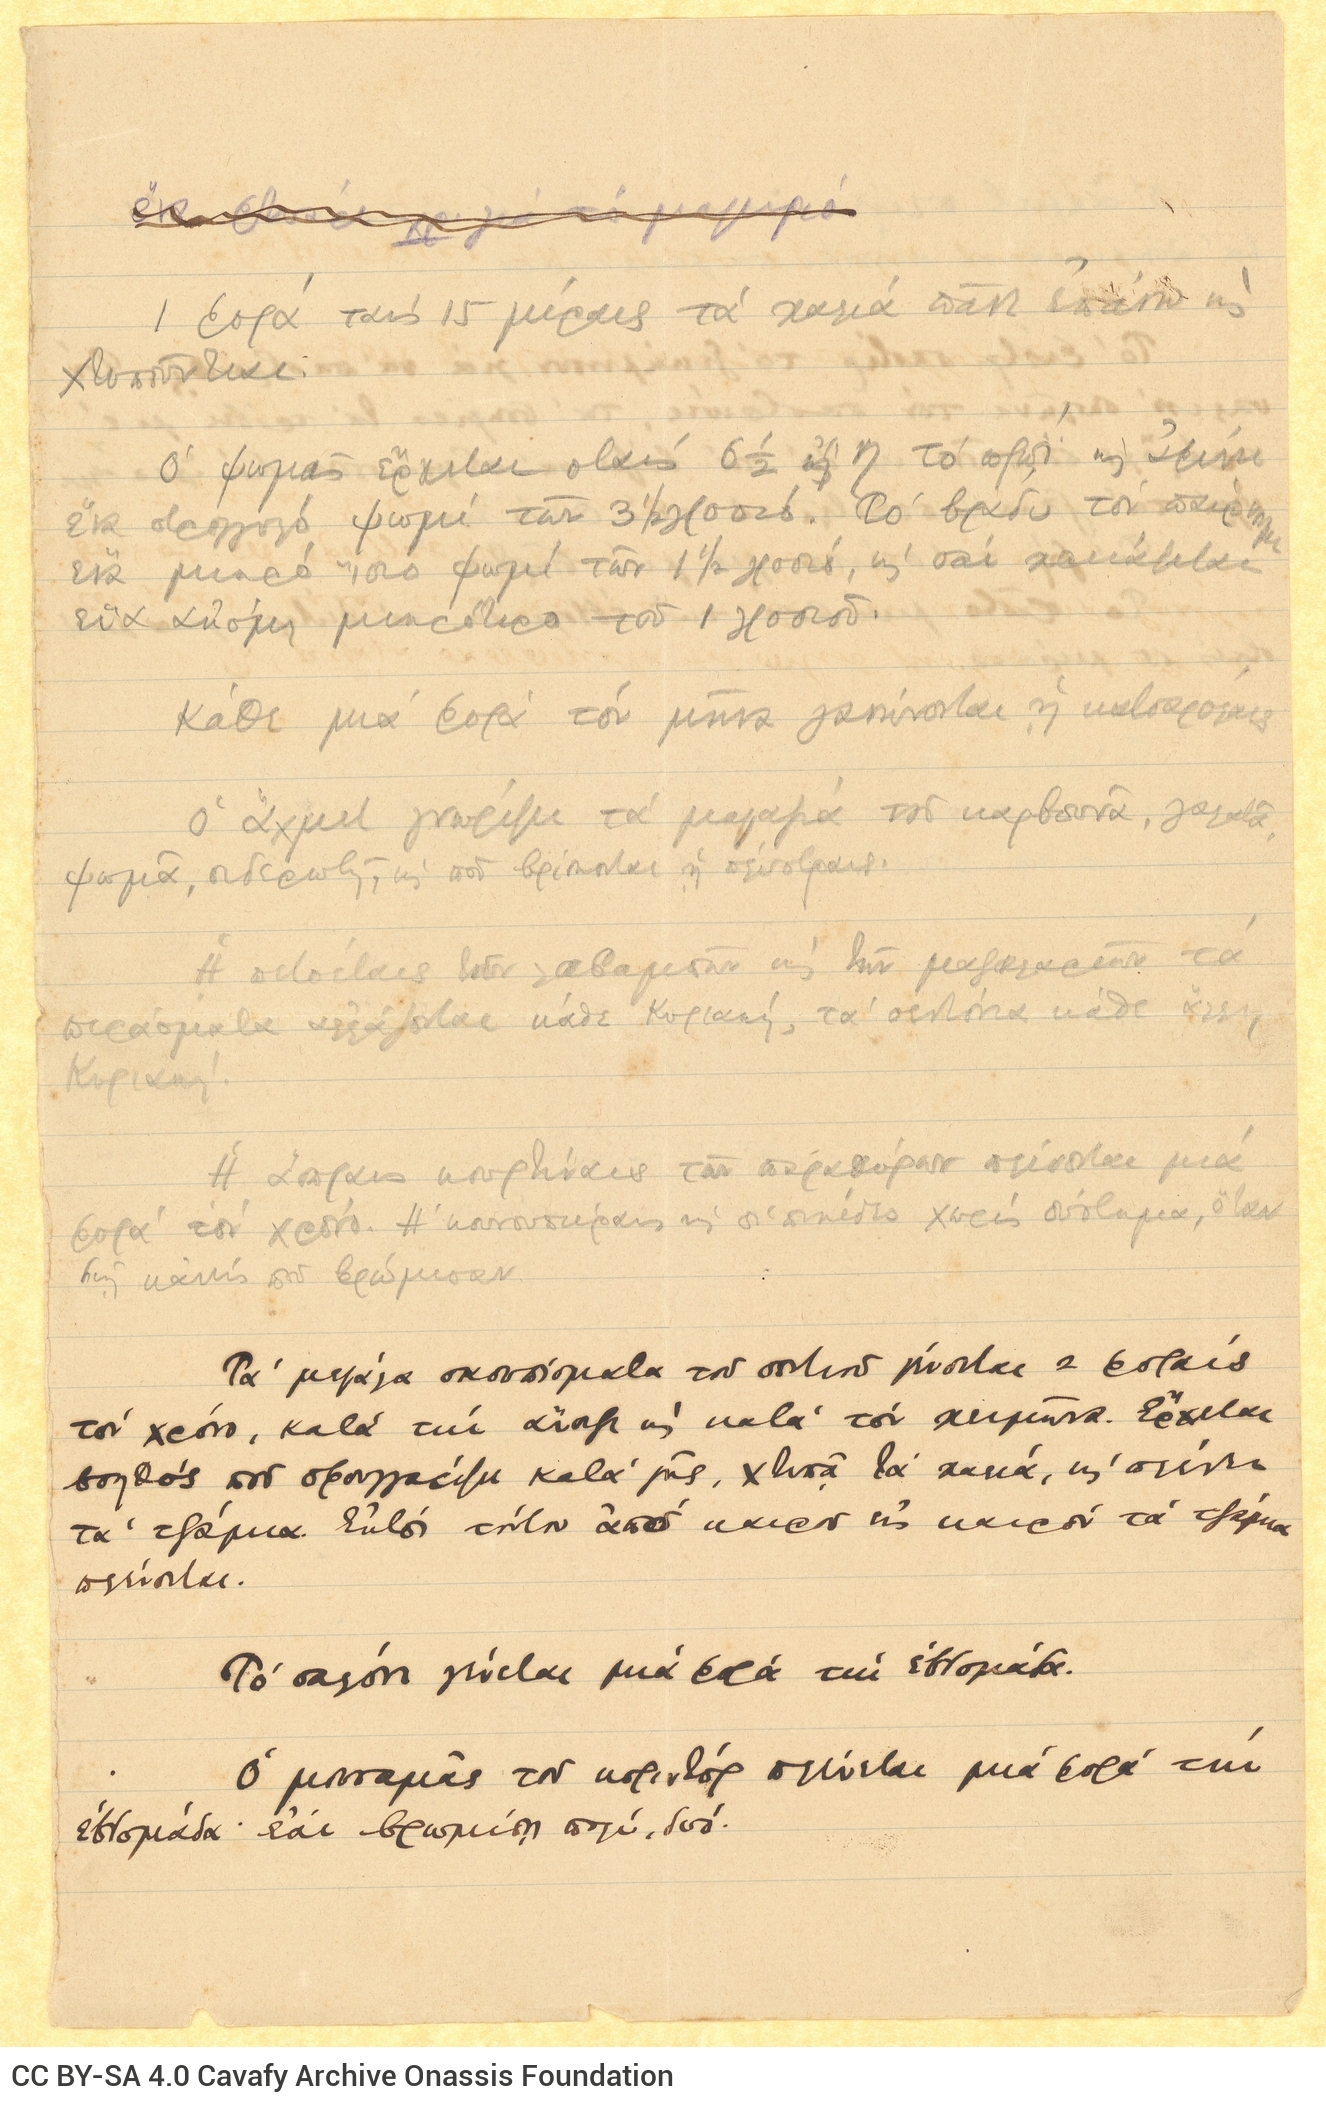 Handwritten note by Cavafy related to household chores on both sides of a ruled sheet. Detailed description of periodic ta